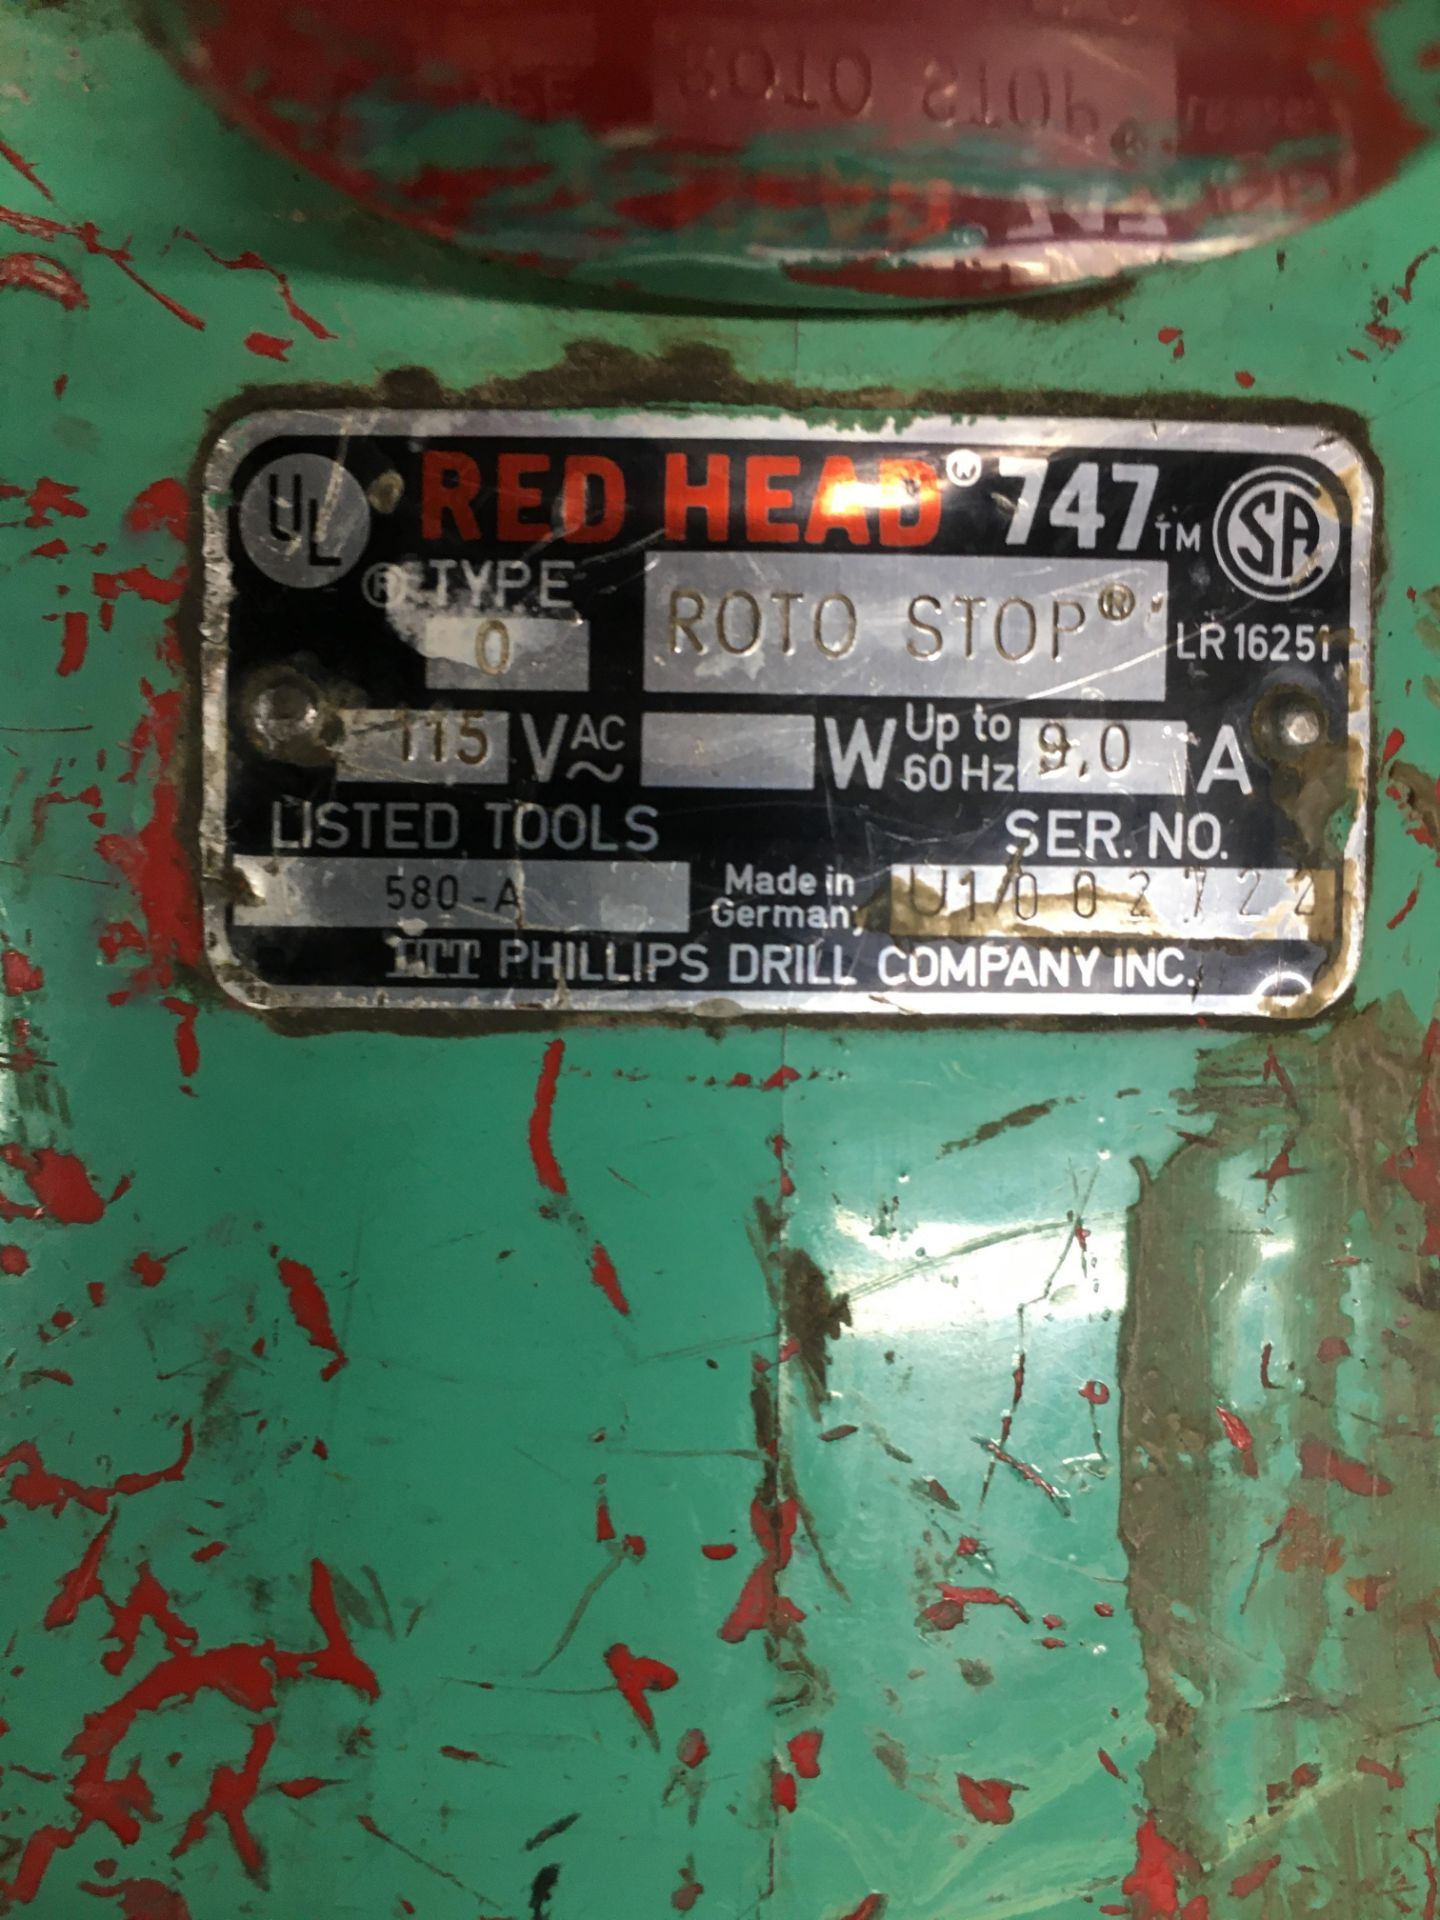 Red Head 747 Roto Stop Hammer Drill - Image 2 of 2